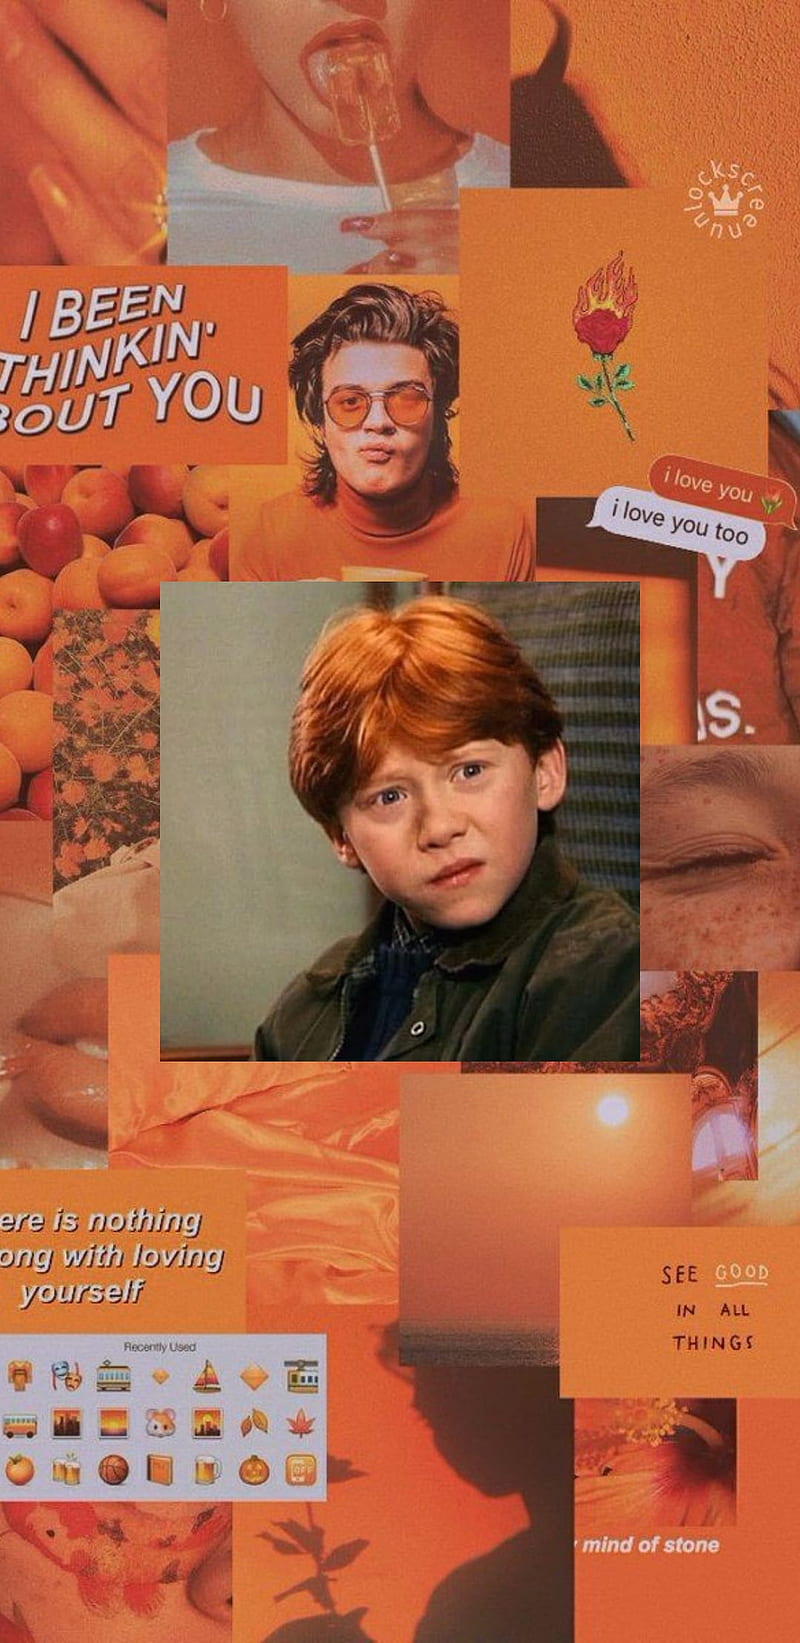 ron weasley» 1080P, 2k, 4k HD wallpapers, backgrounds free download | Rare  Gallery